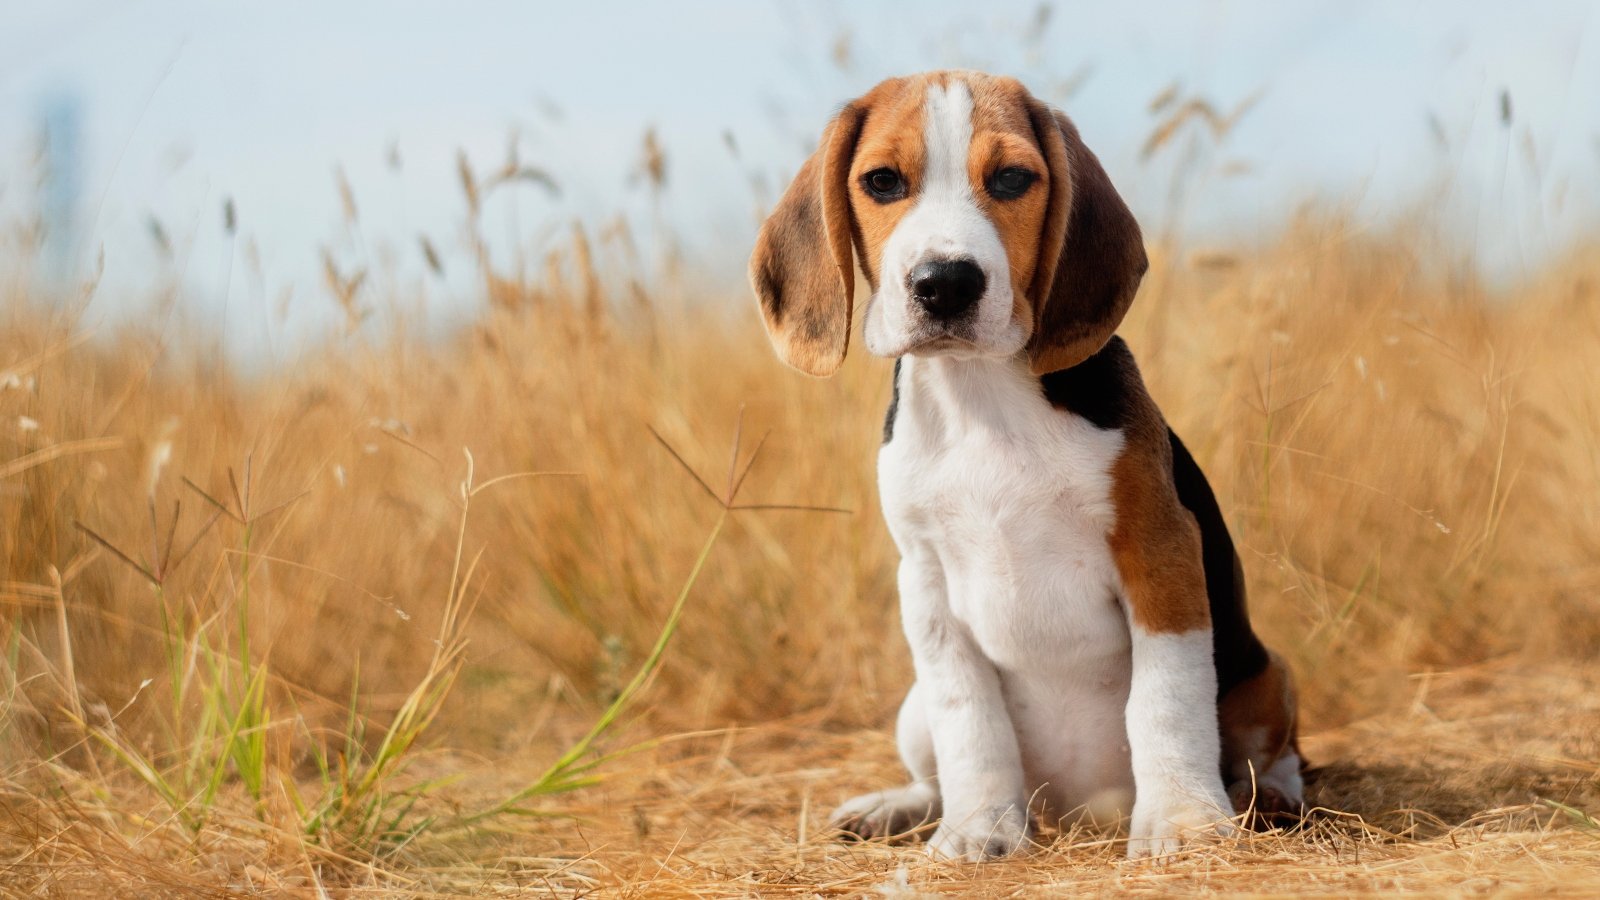 A beagle puppy sitting in the grass